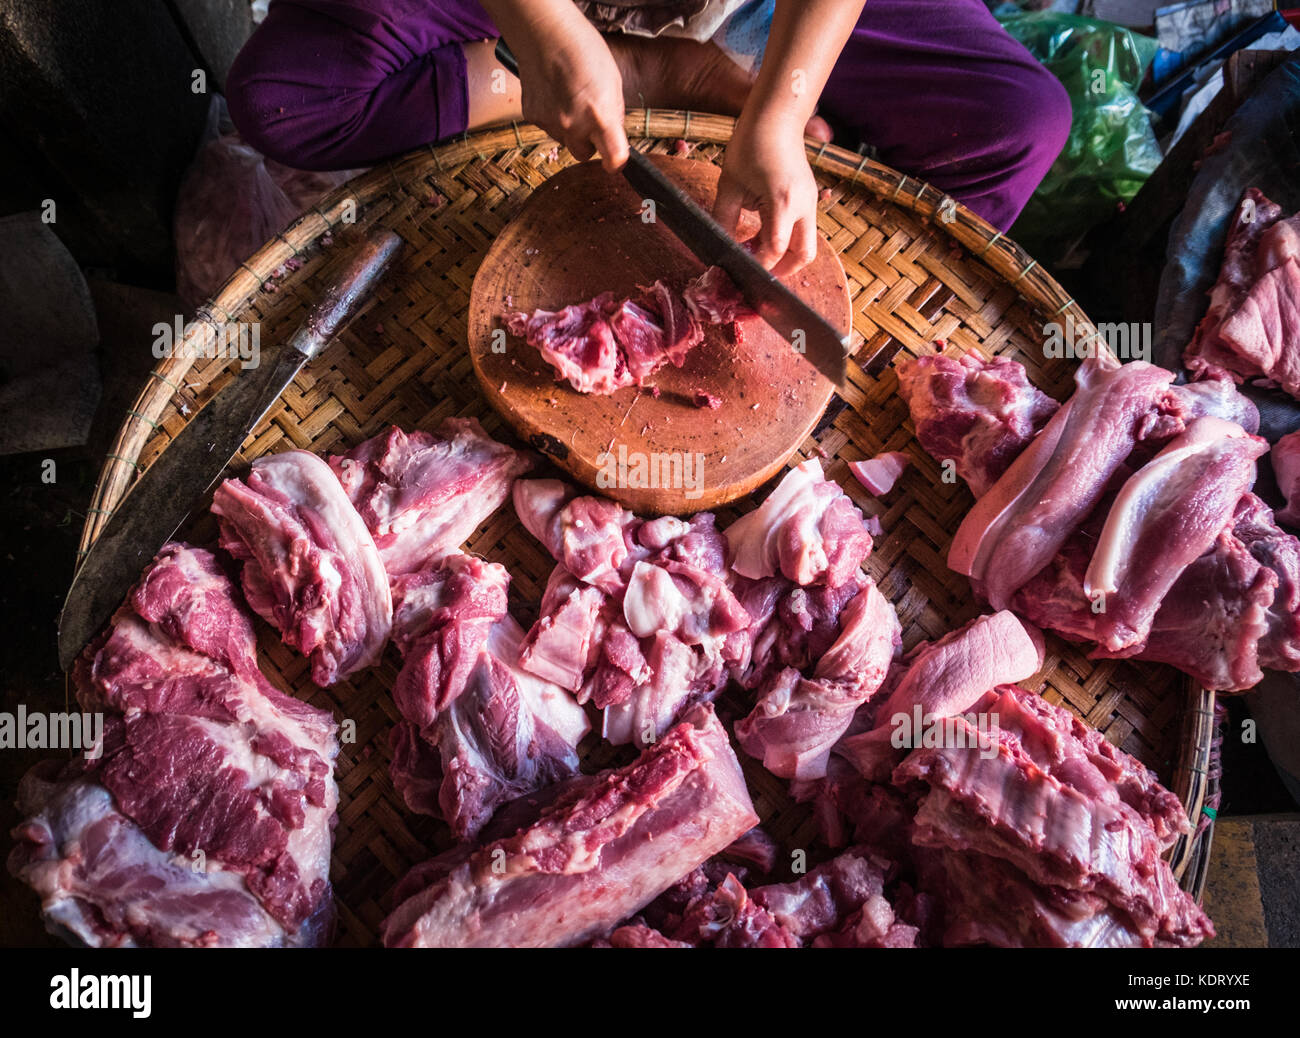 A female butcher cutting and preparing pork meat in Dong Ba Market, Hue, Vietnam Stock Photo